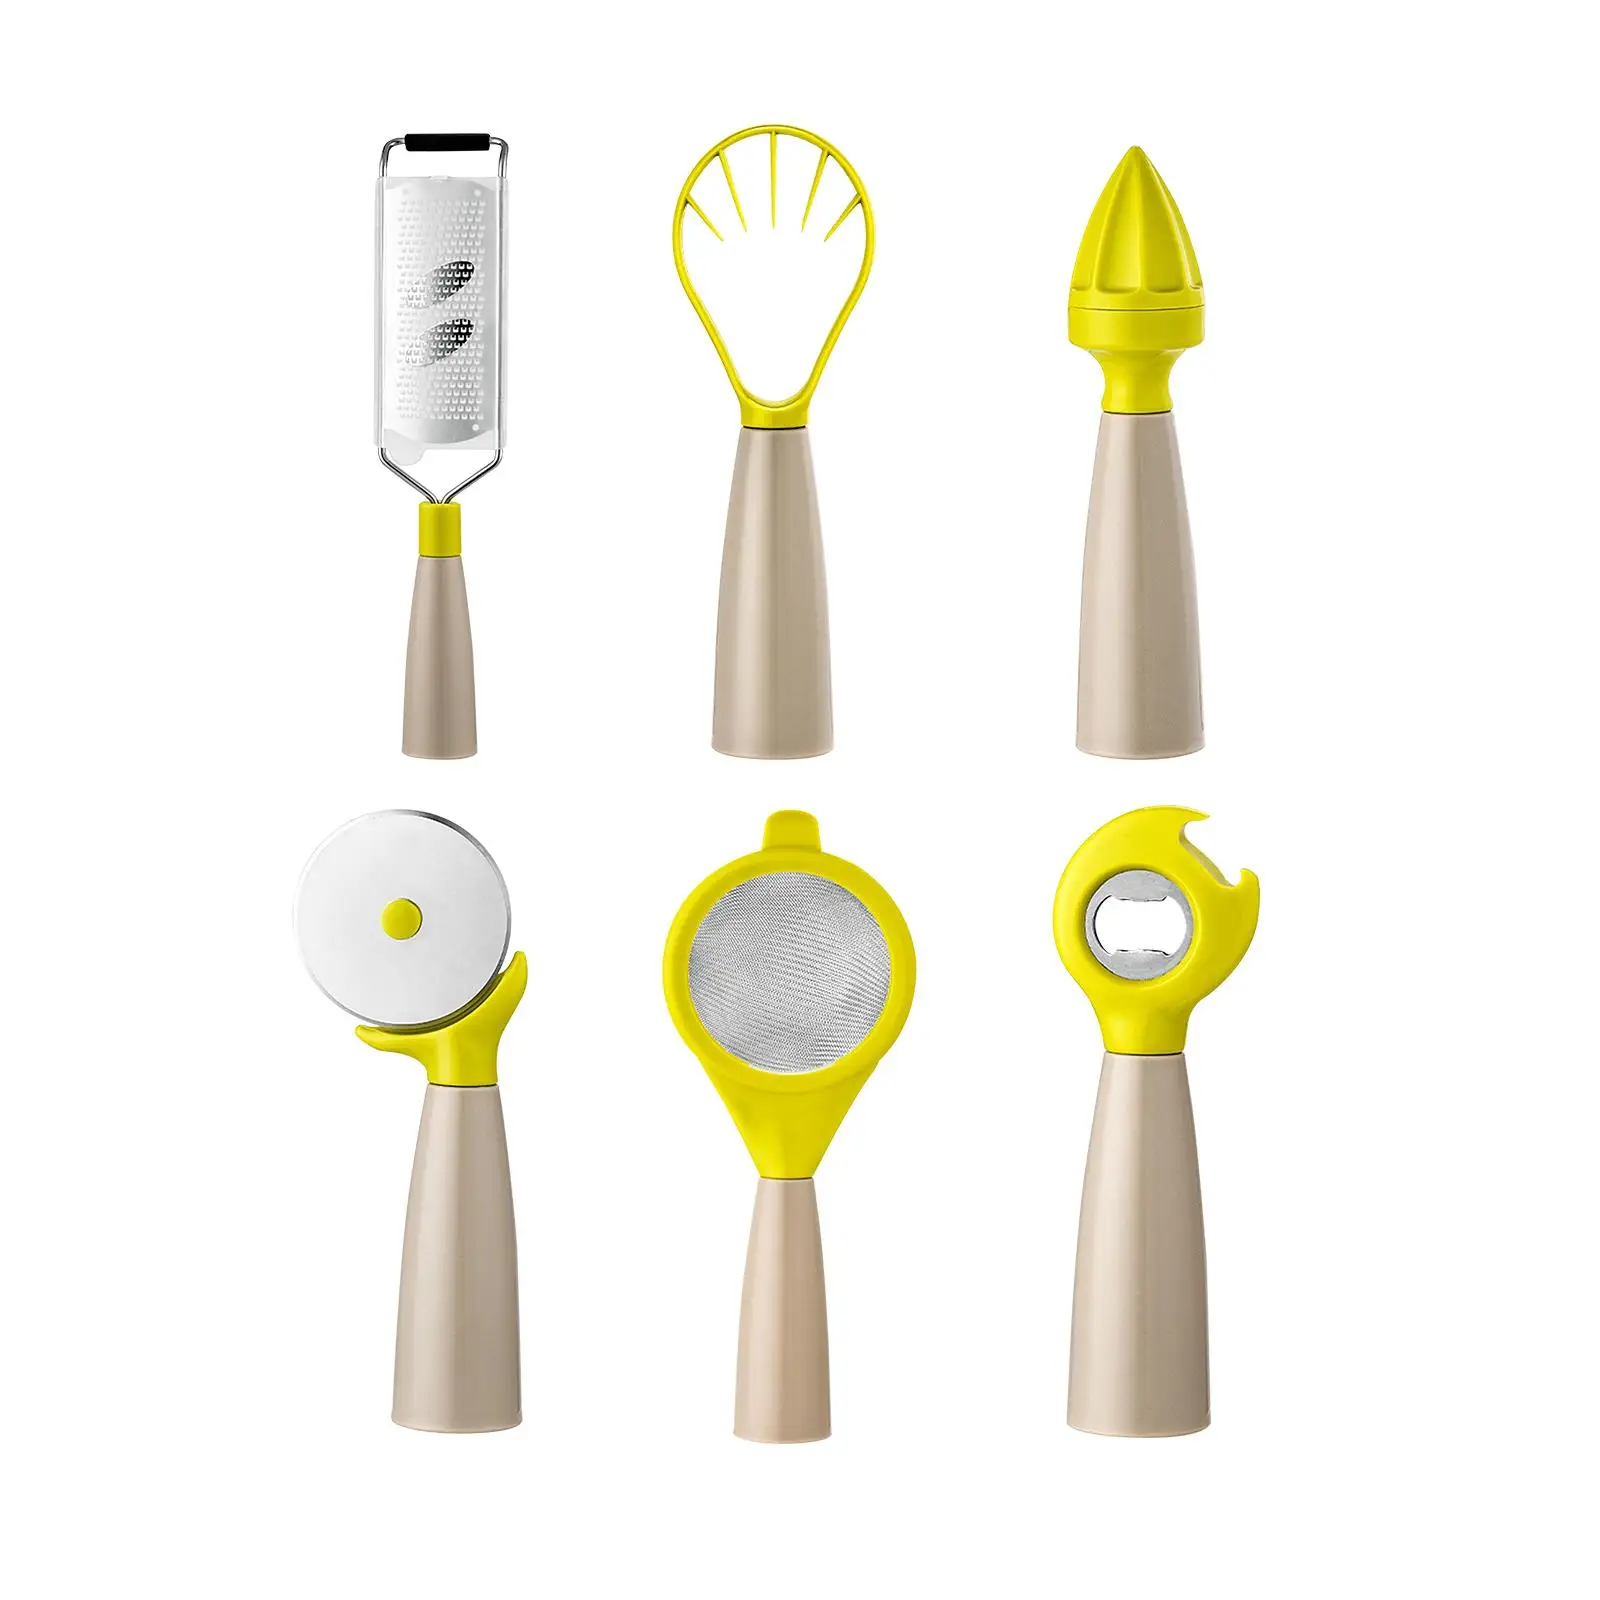 6Pcs Kitchen Tools Set Fruit Extractor Strainer Juicer Bottle Opener Space Saving for Garlic RV Cheese Vegetable Accessories